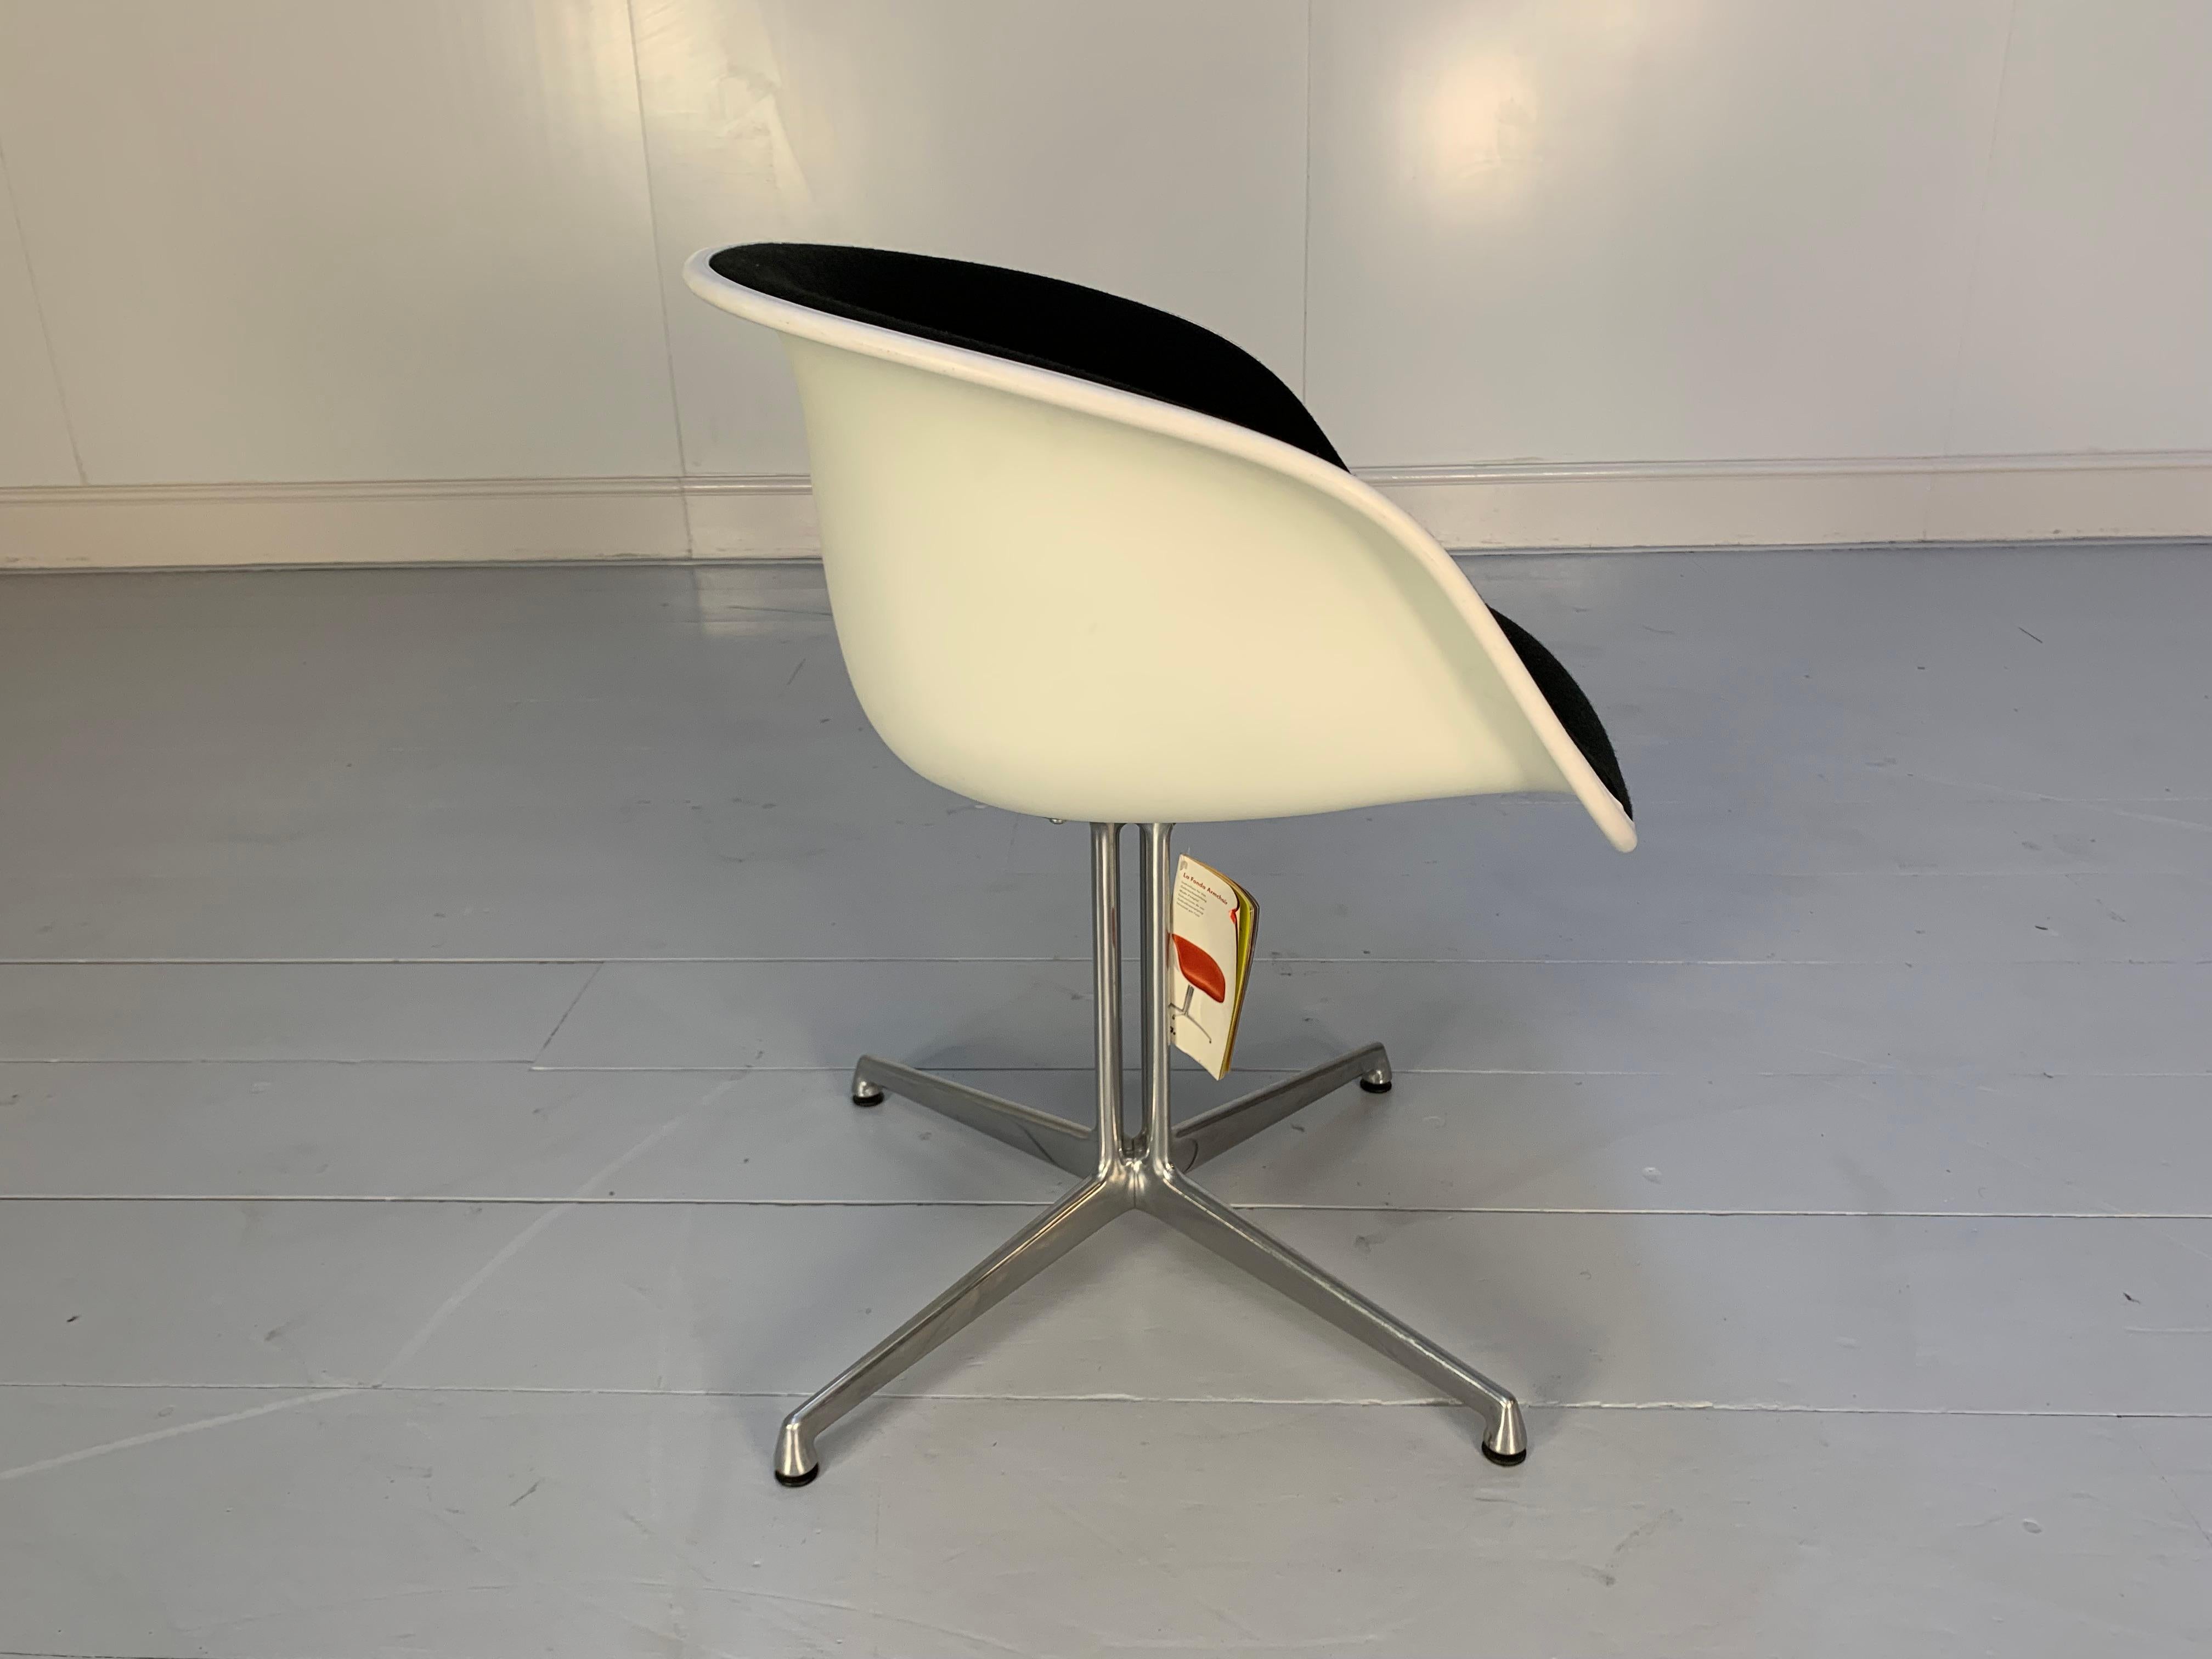 Vitra “La Fonda” Eames Chair & Marble Table in Black Hopsack For Sale 4